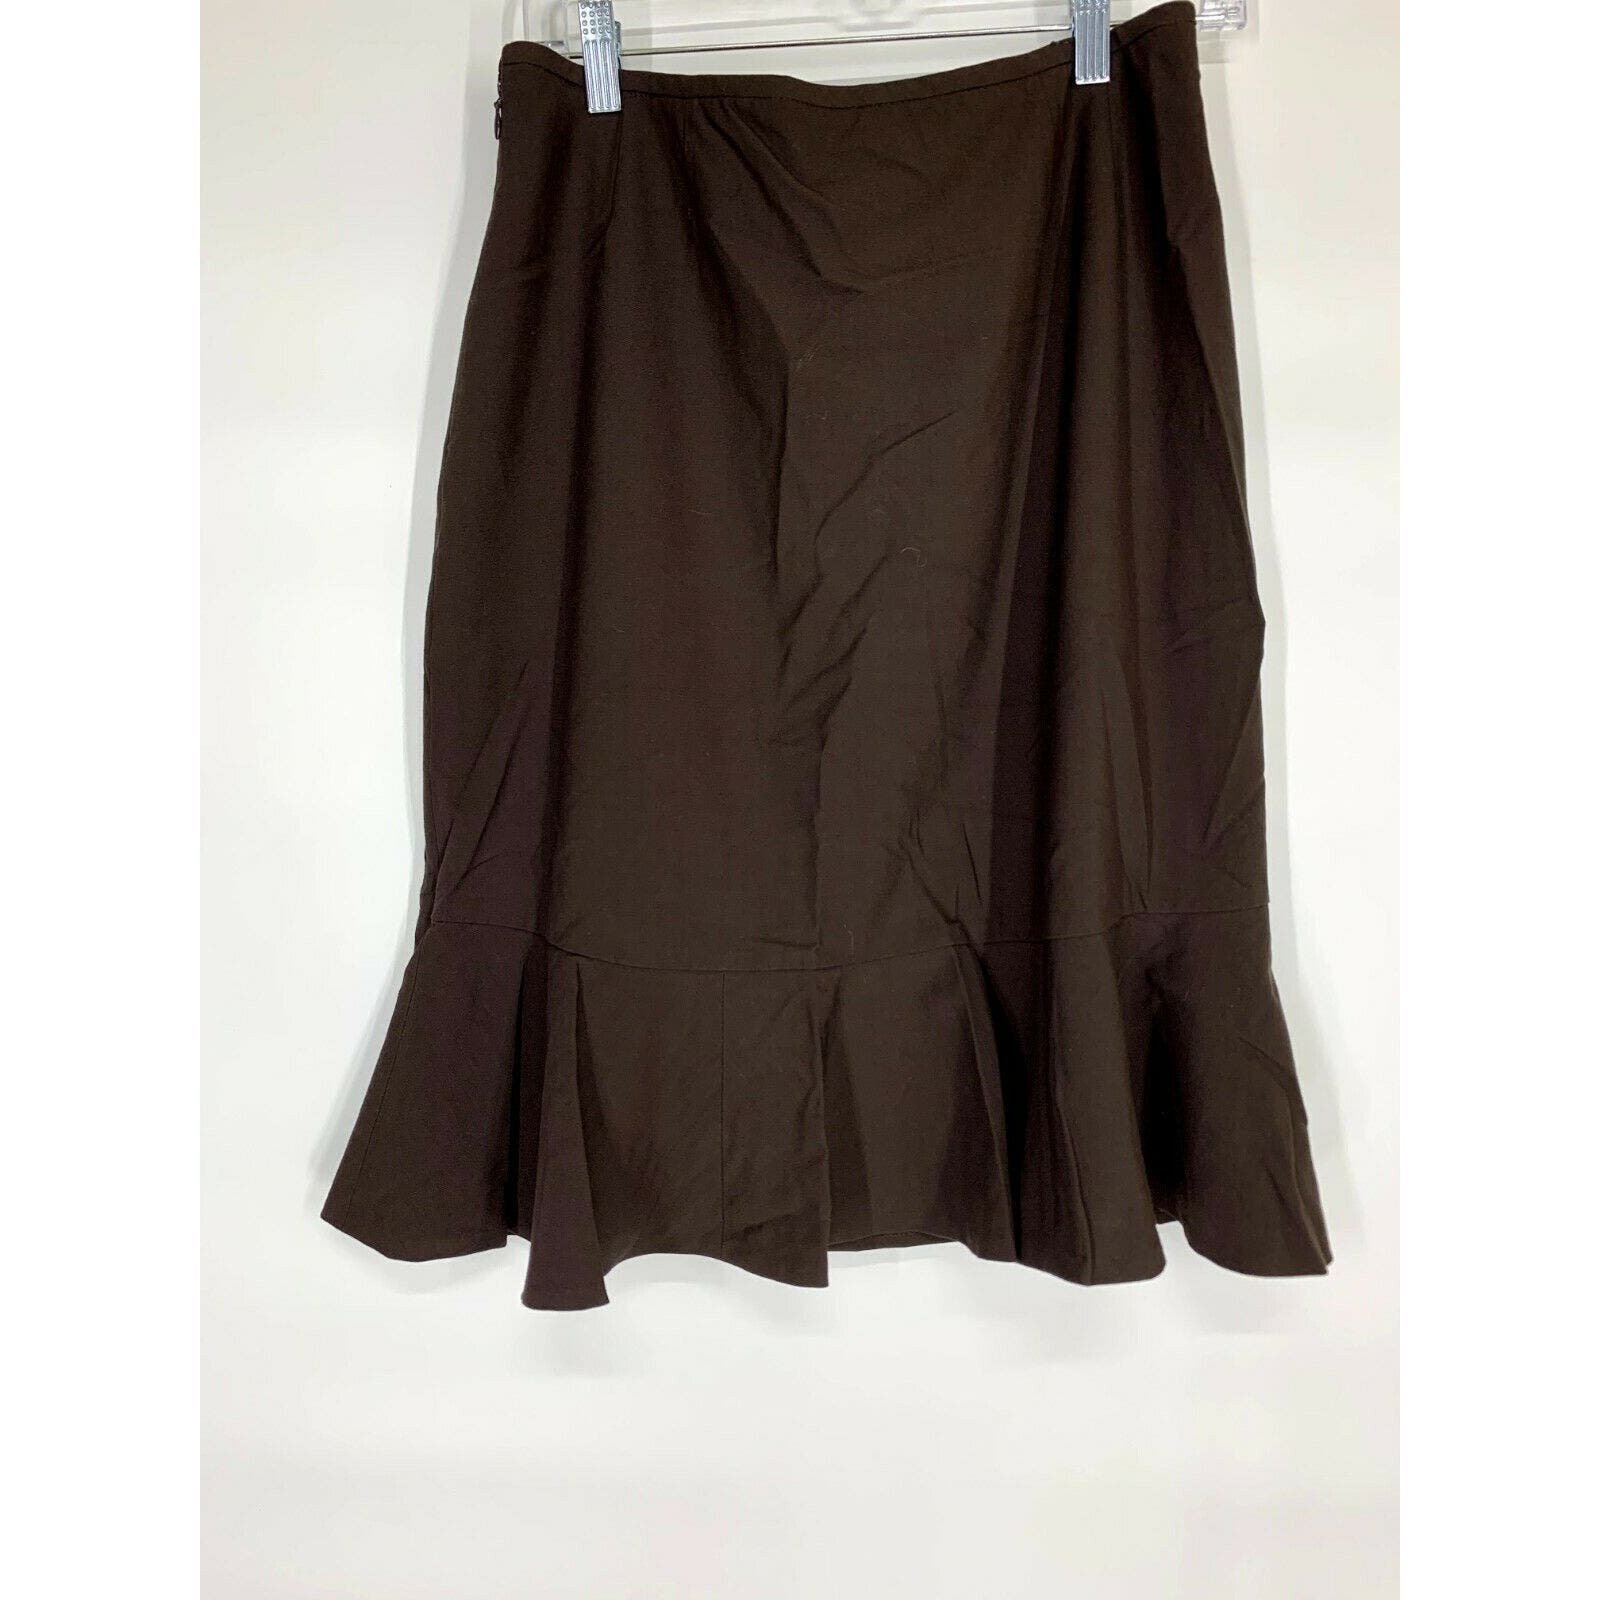 Promotions  Solid Brown A-Line Knee Length Midi Flare Skirt Women’s lSMe0BtOD all for you